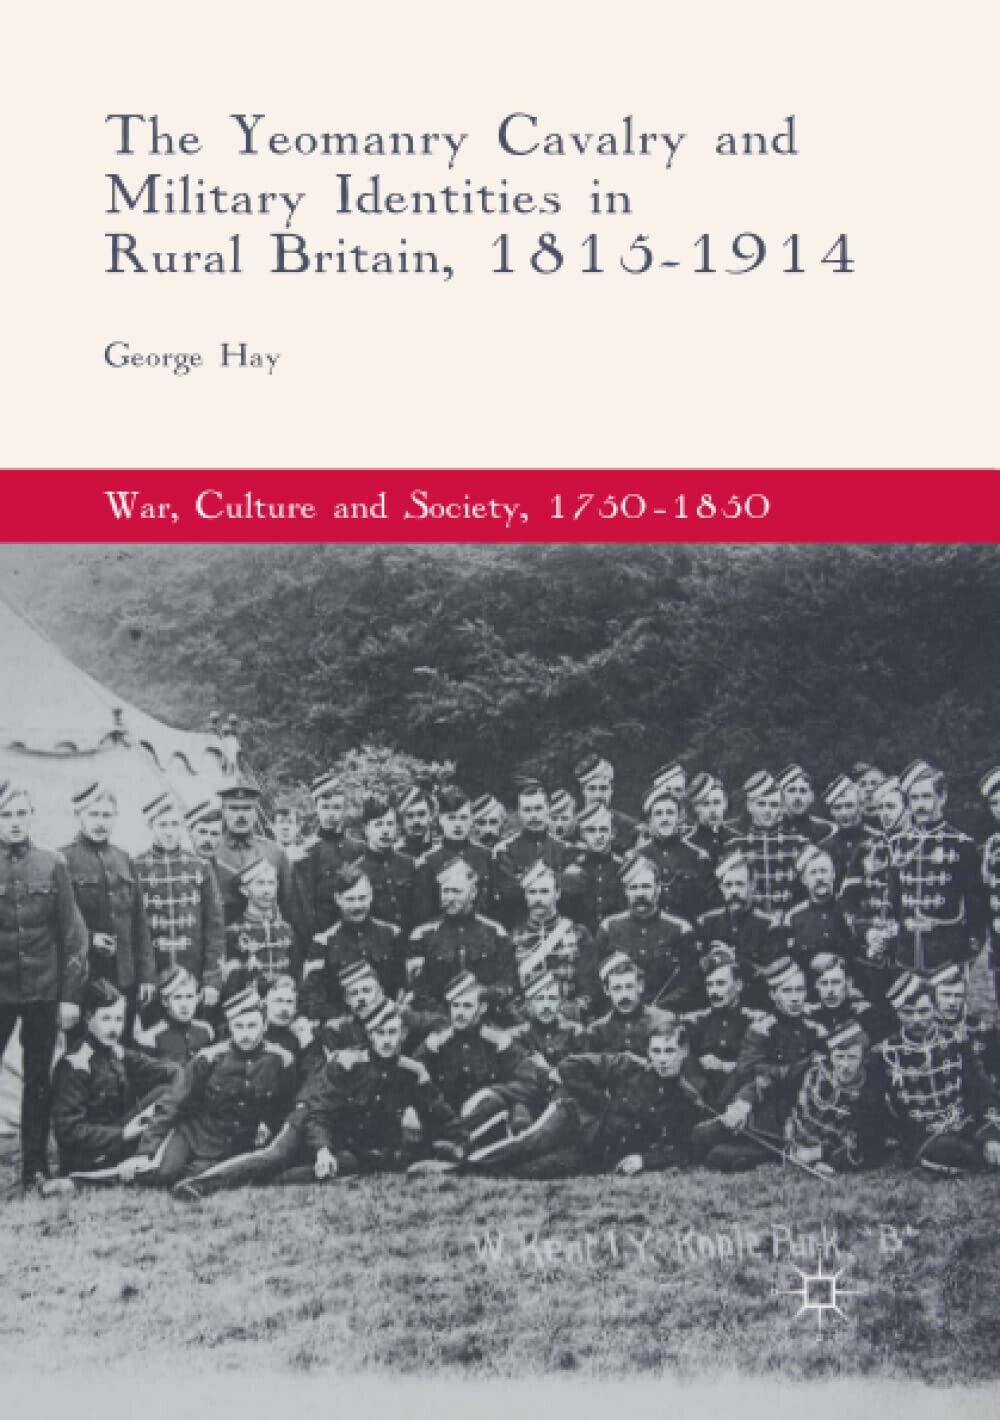 The Yeomanry Cavalry and Military Identities in Rural Britain, 1815-1914 - 2018 libro usato